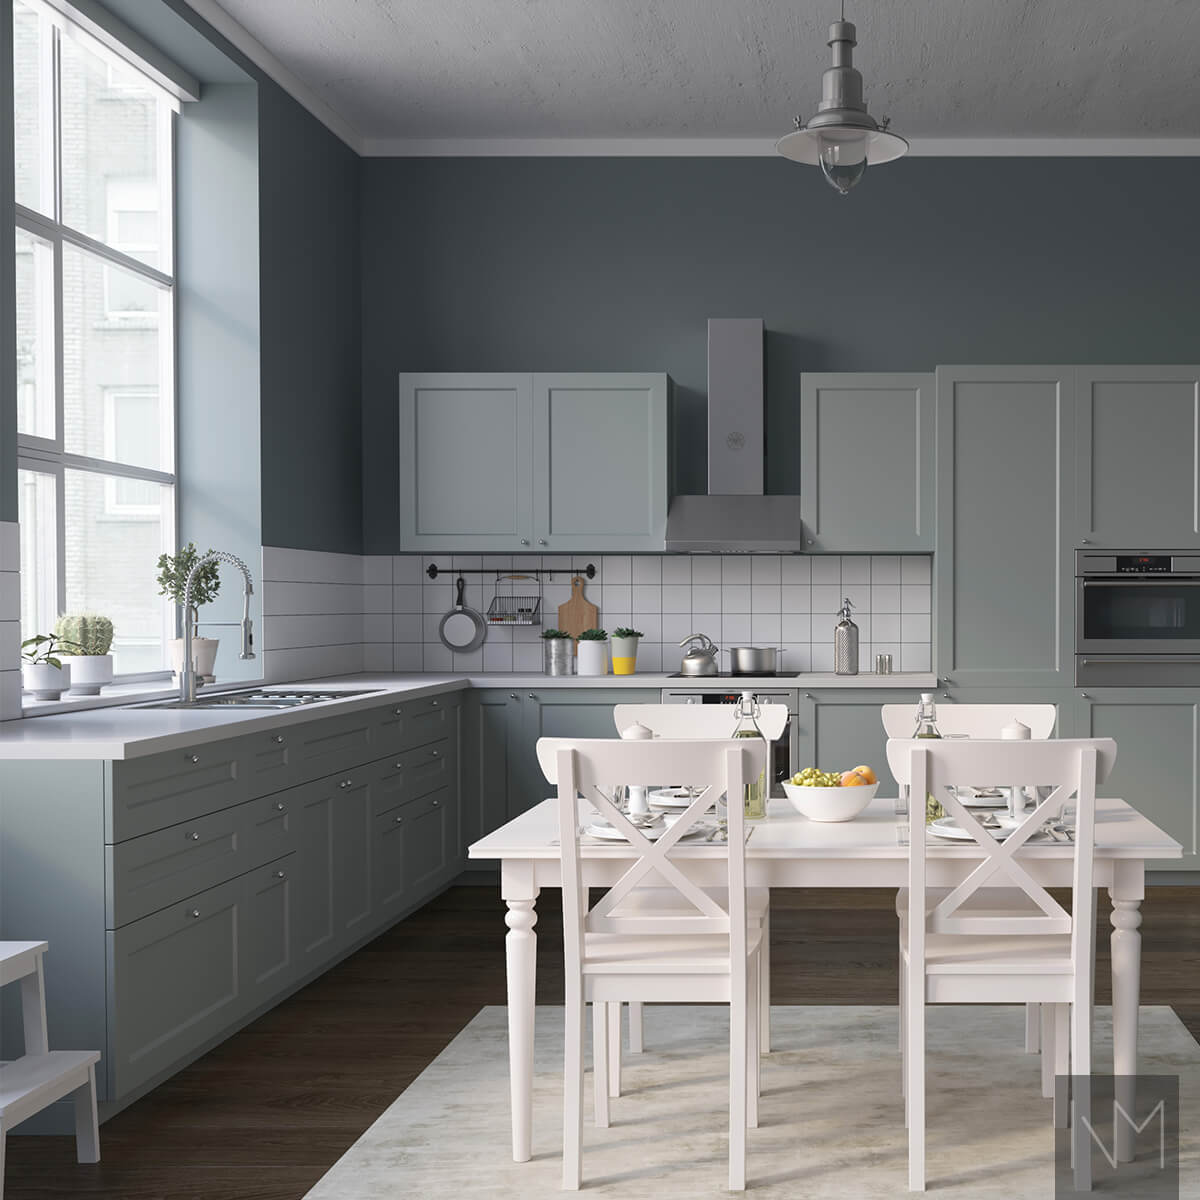 IKEA Metod or Faktum kitchen Classic. Colour NCS 5105-B81G or Jotun Evening Green 6352.